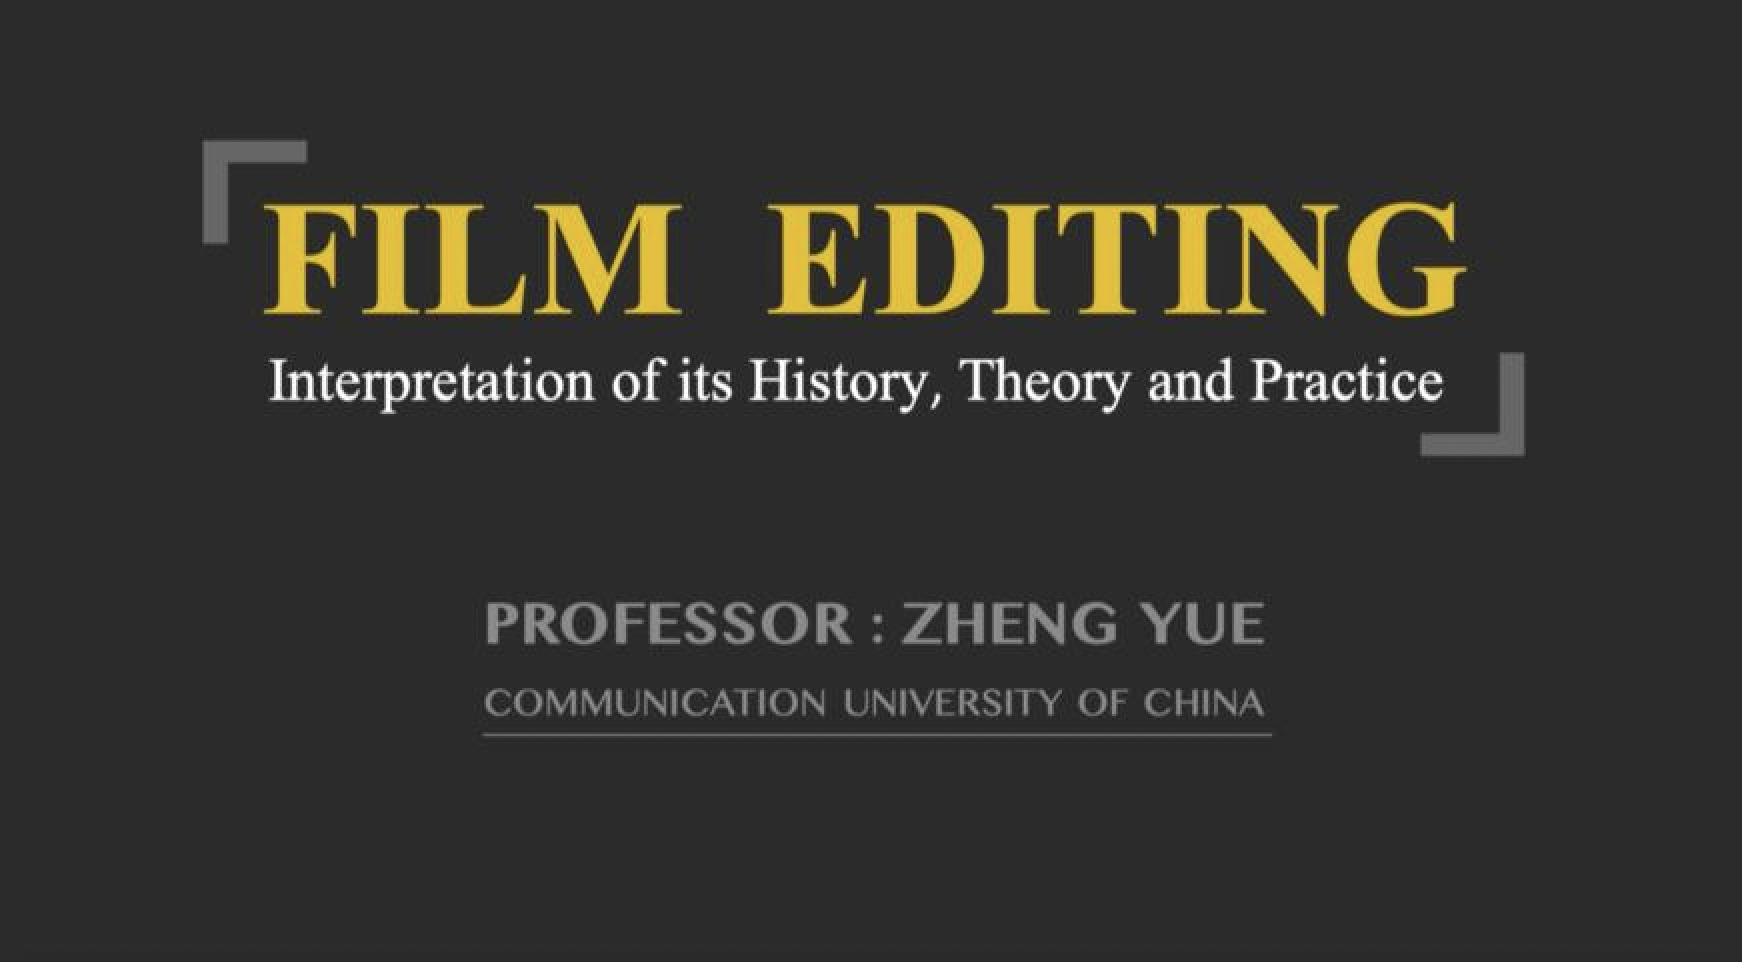 Film Editing: Interpretation of its History, Theory and Practice feihtpcuc